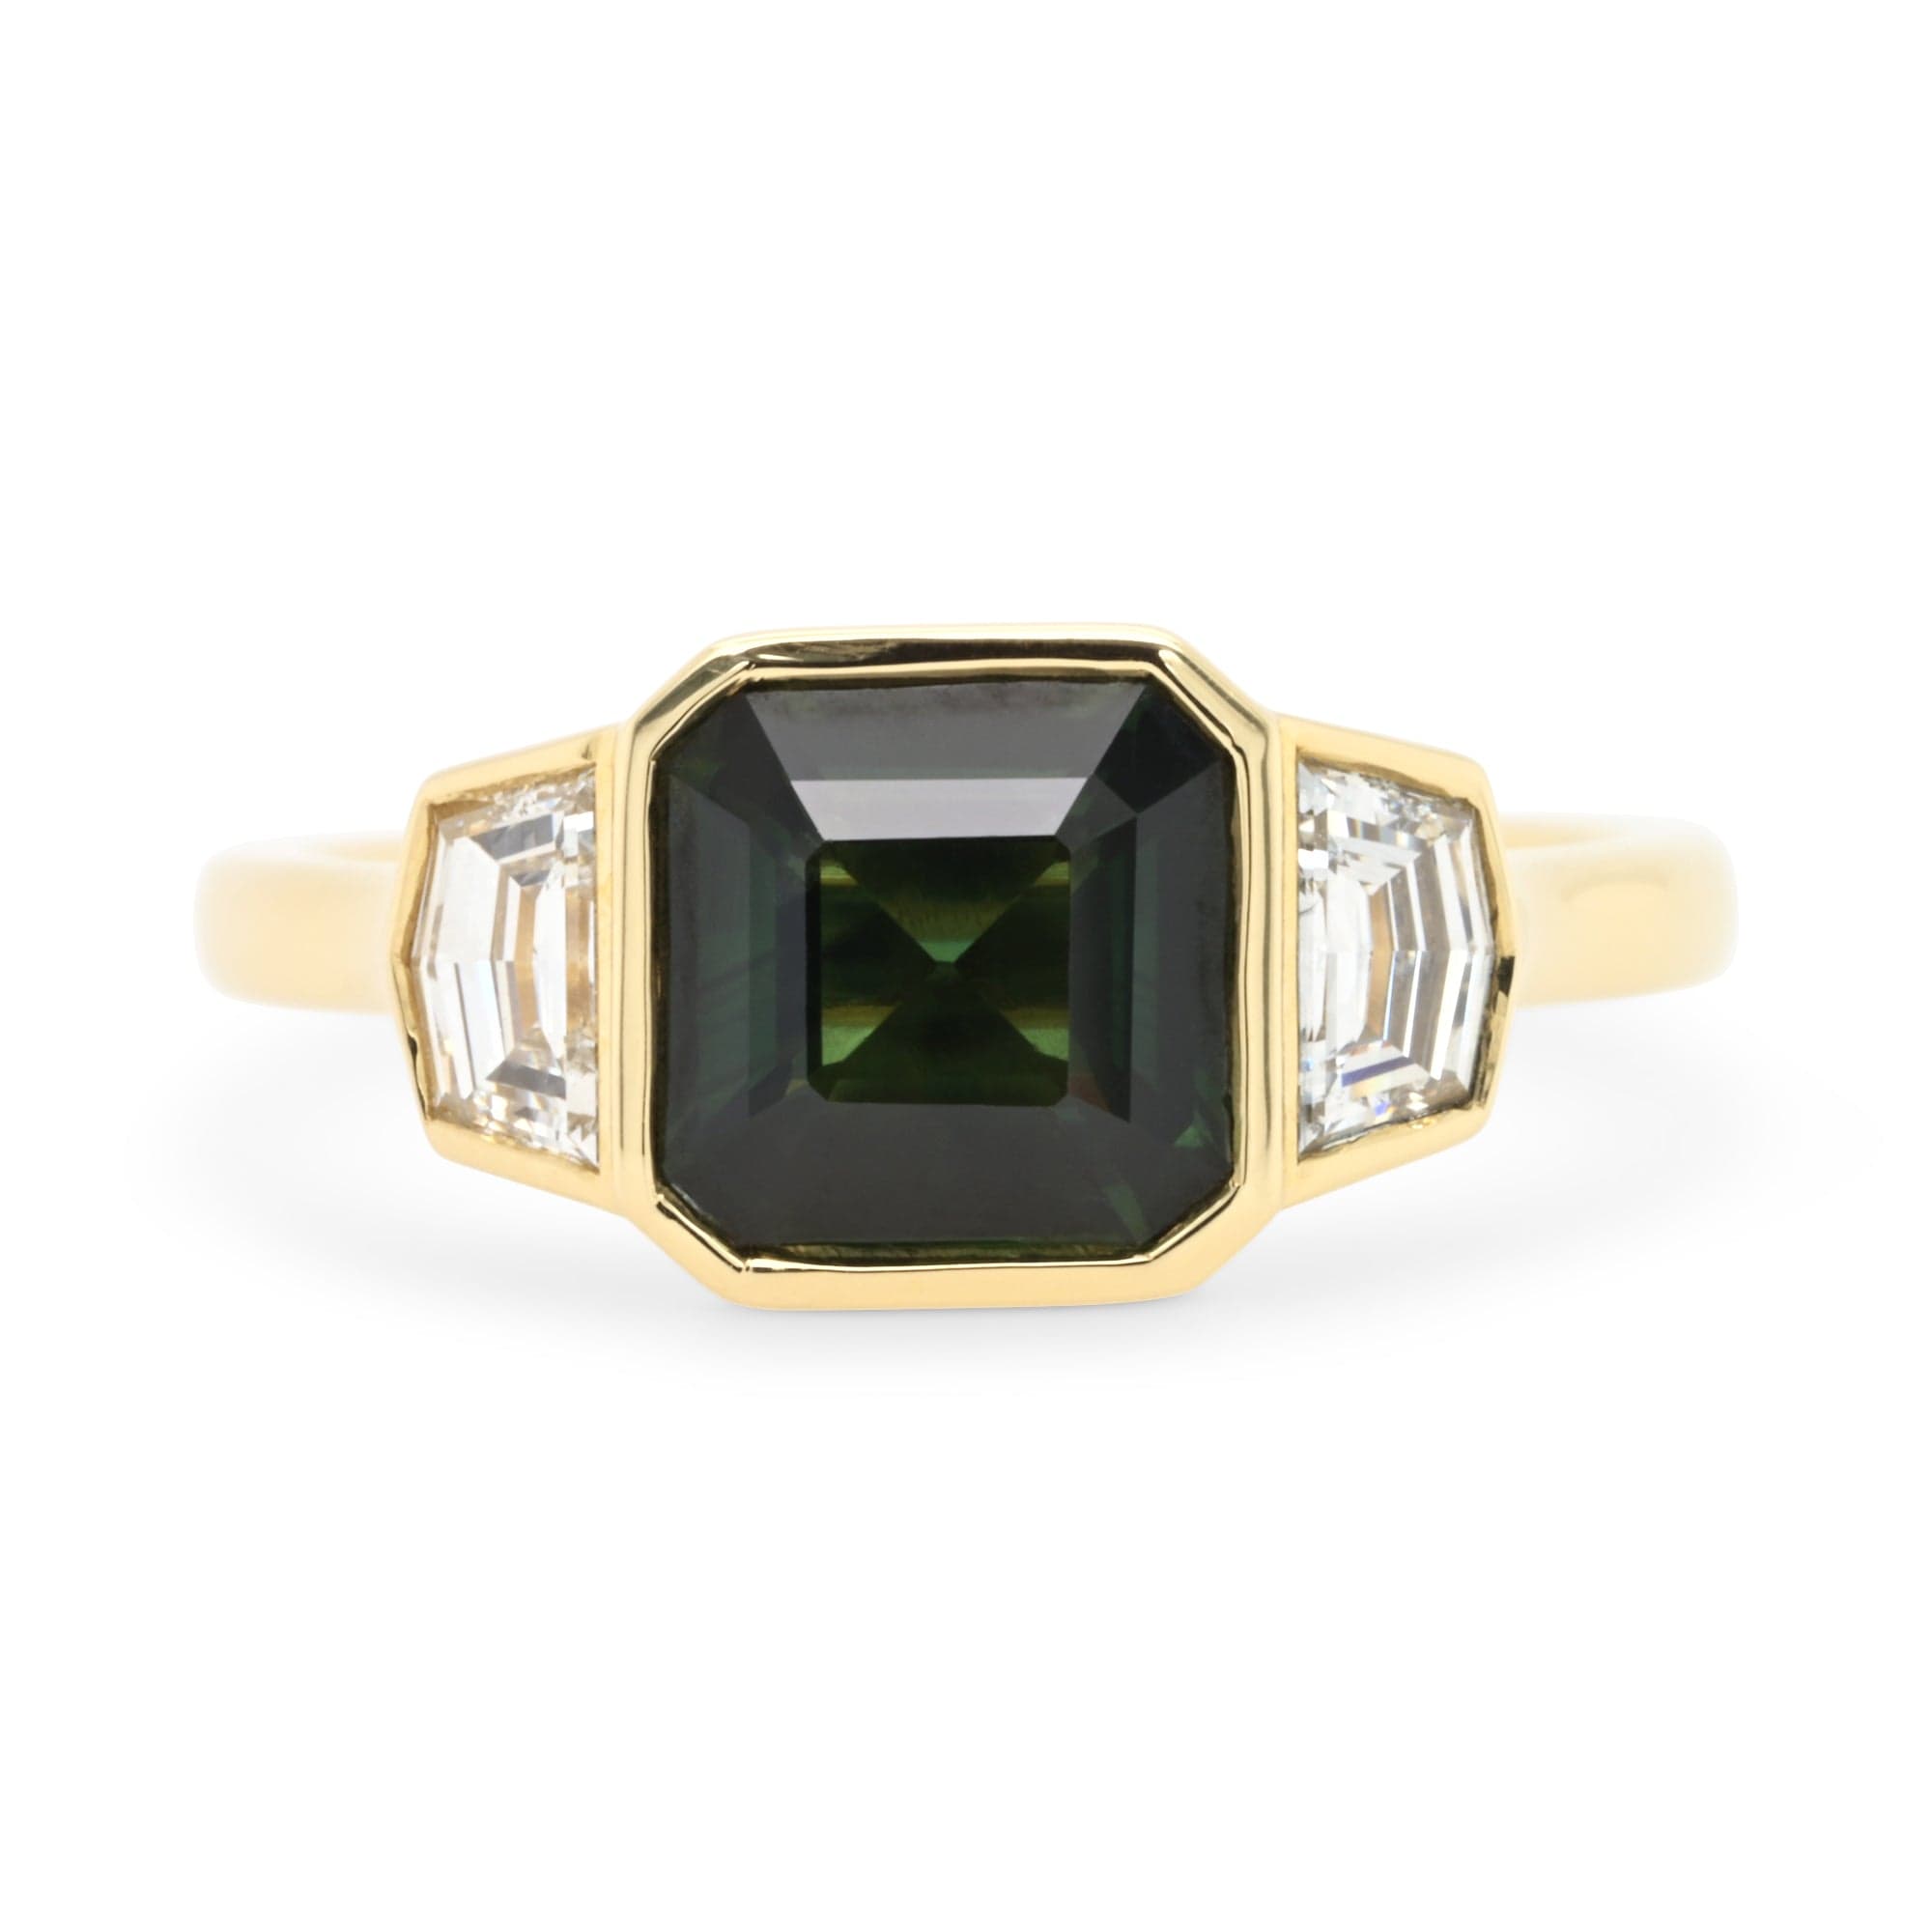 14k yellow gold art deco inspired green sapphire and diamond engagement ring